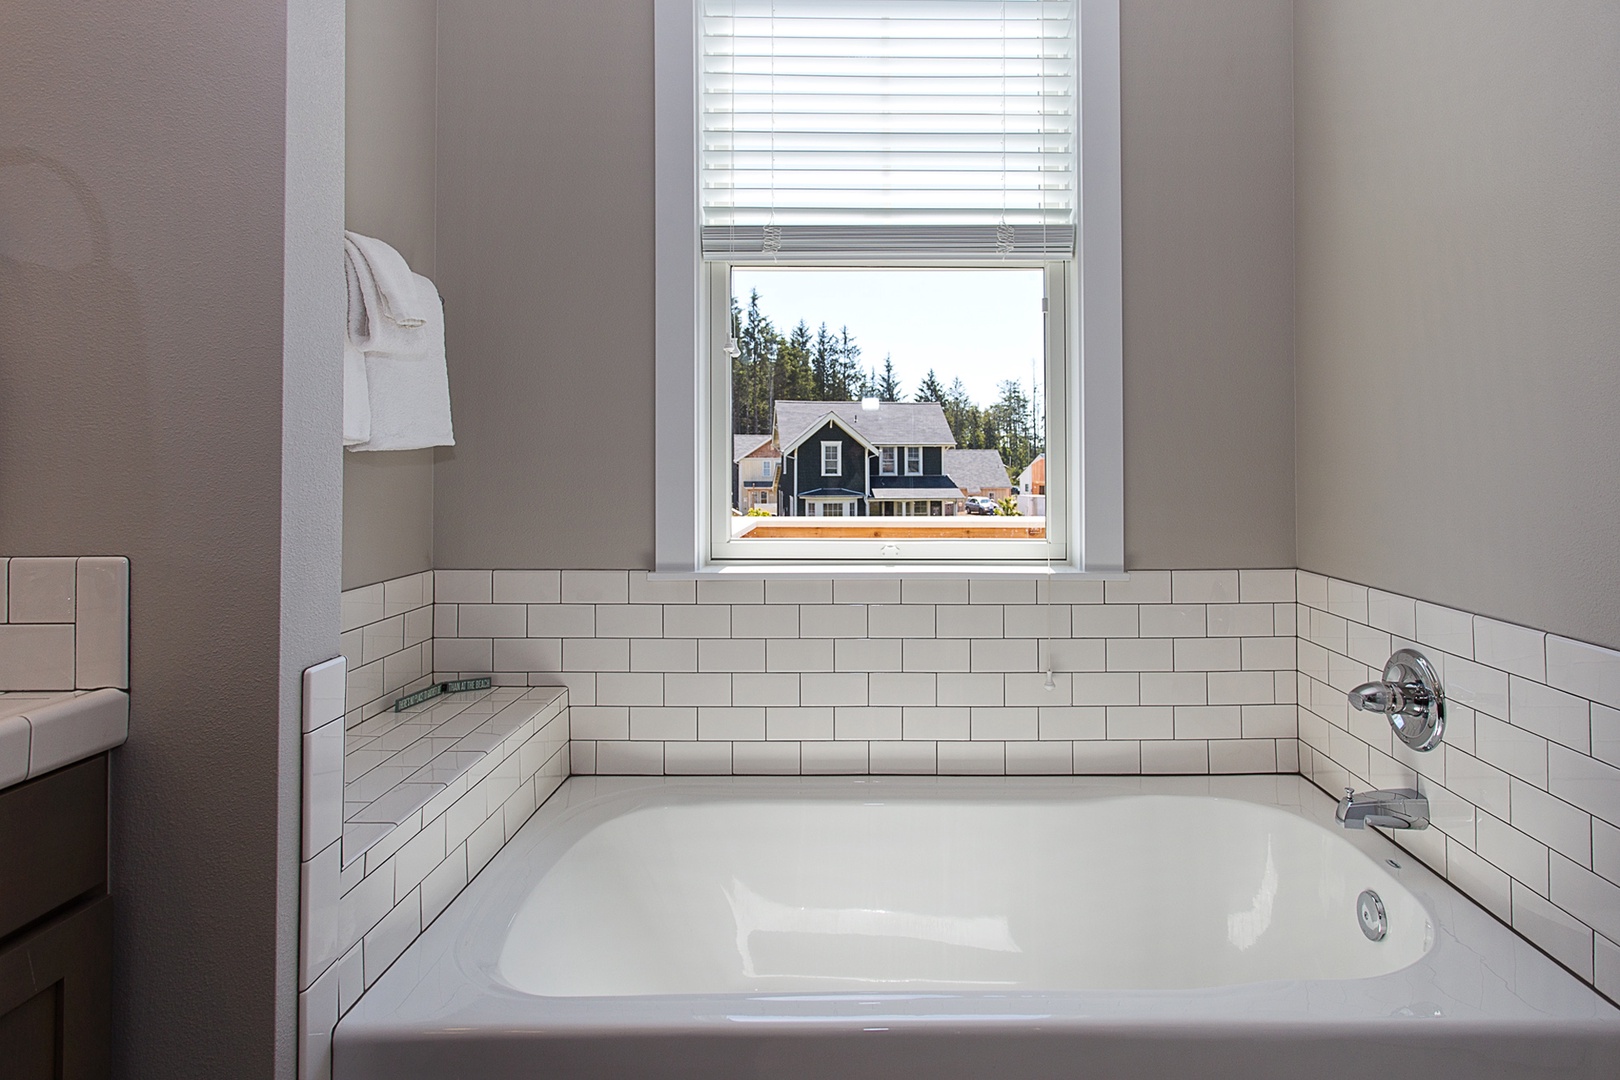 Soak in the views of Horseshoe Park in your master bath